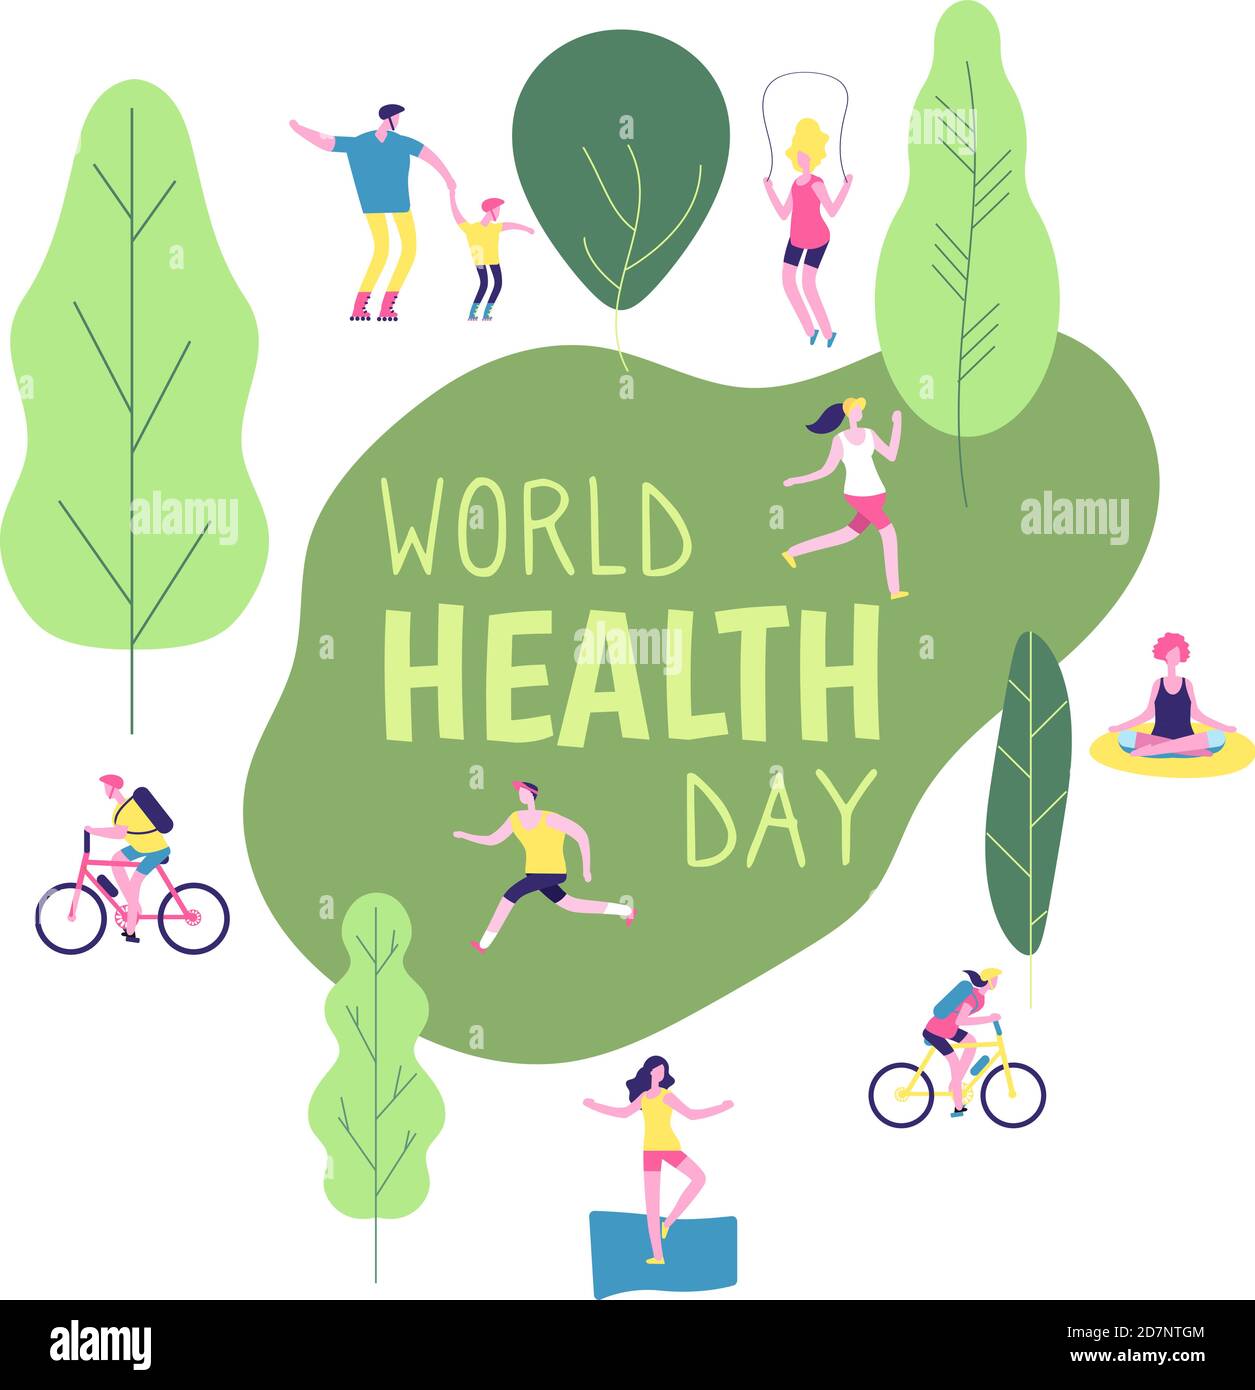 World health day concept. Healthy lifestyle man woman fitness diet fun runner healthcare vector background. Illustration of fitness runner, health run sport Stock Vector